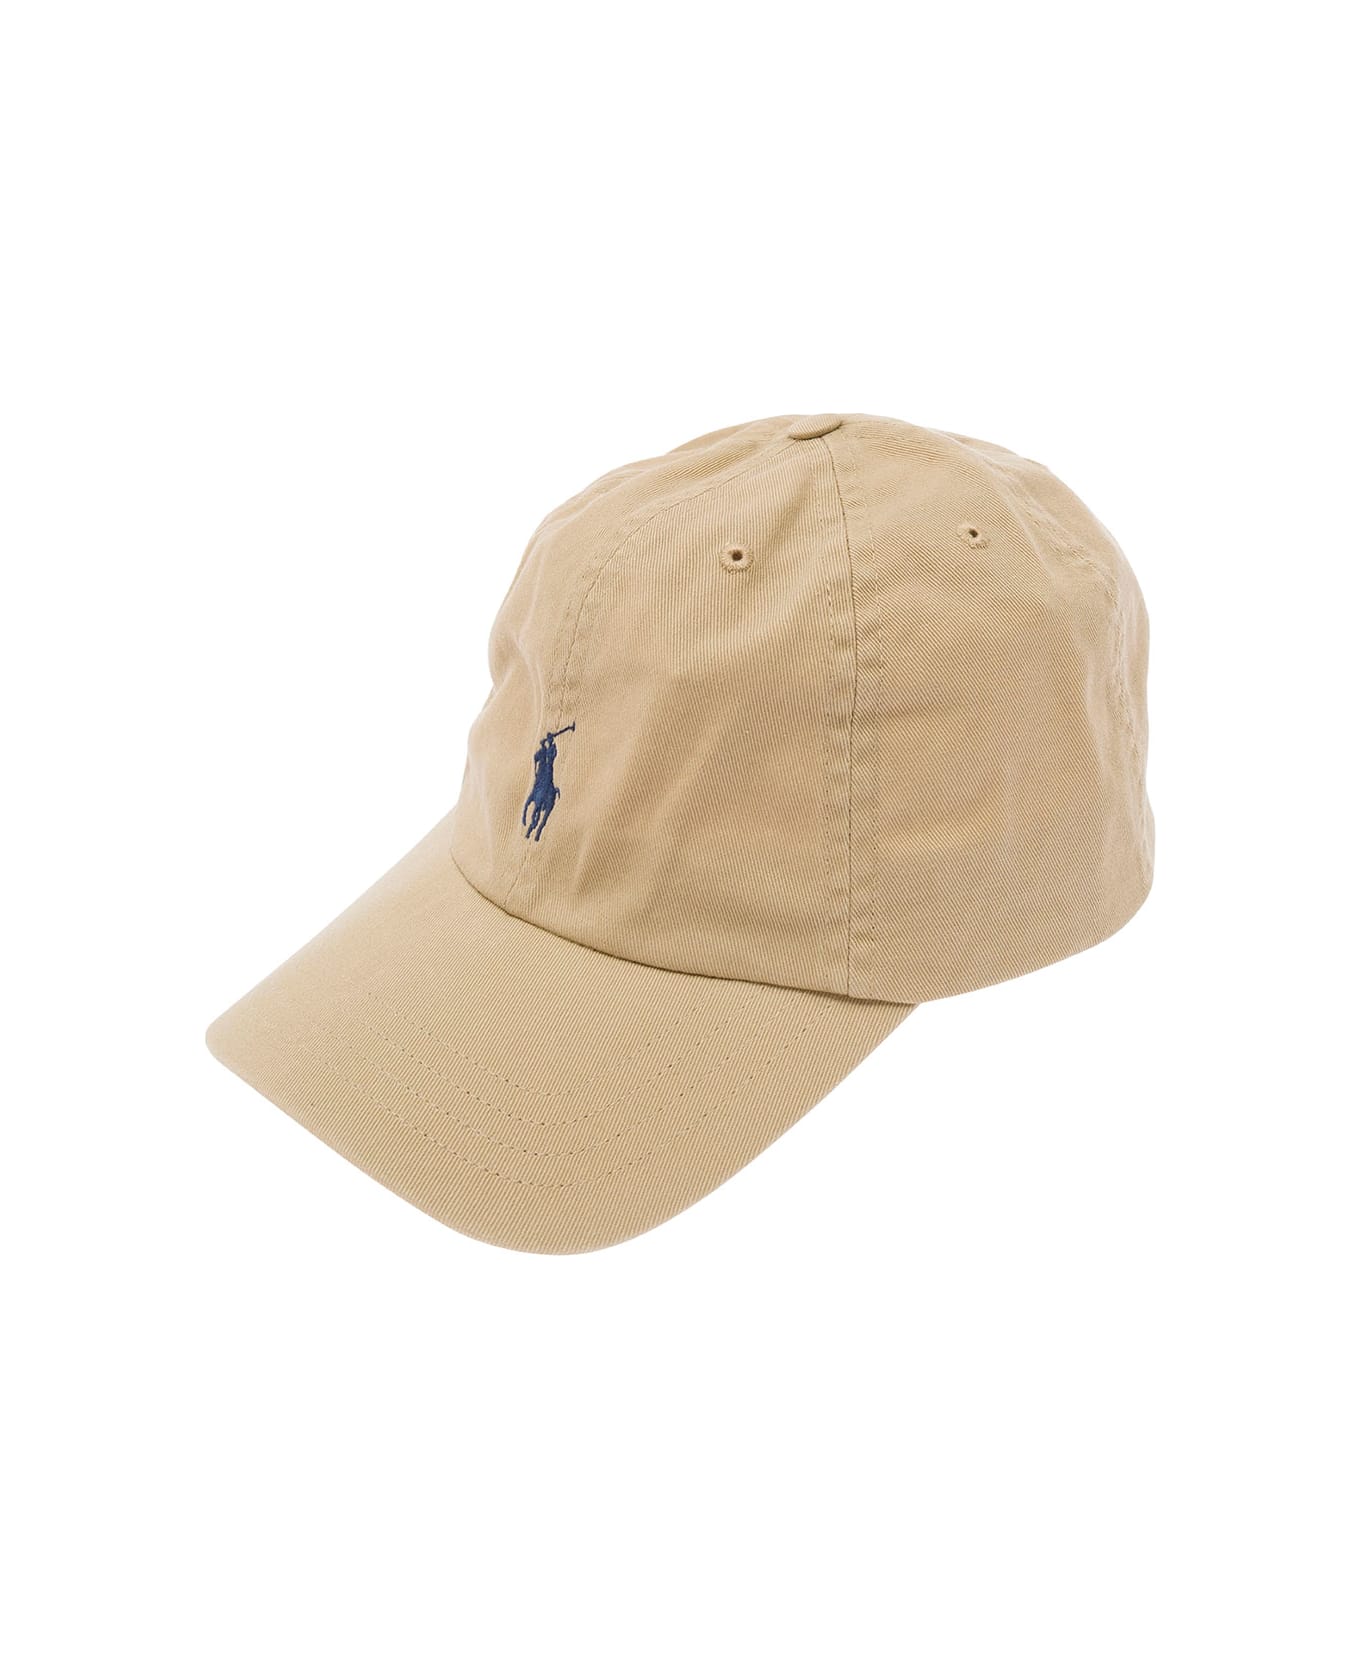 Polo Ralph Lauren Beige Baseball Cap With Pony Embroidery In Cotton Boy - Beige アクセサリー＆ギフト